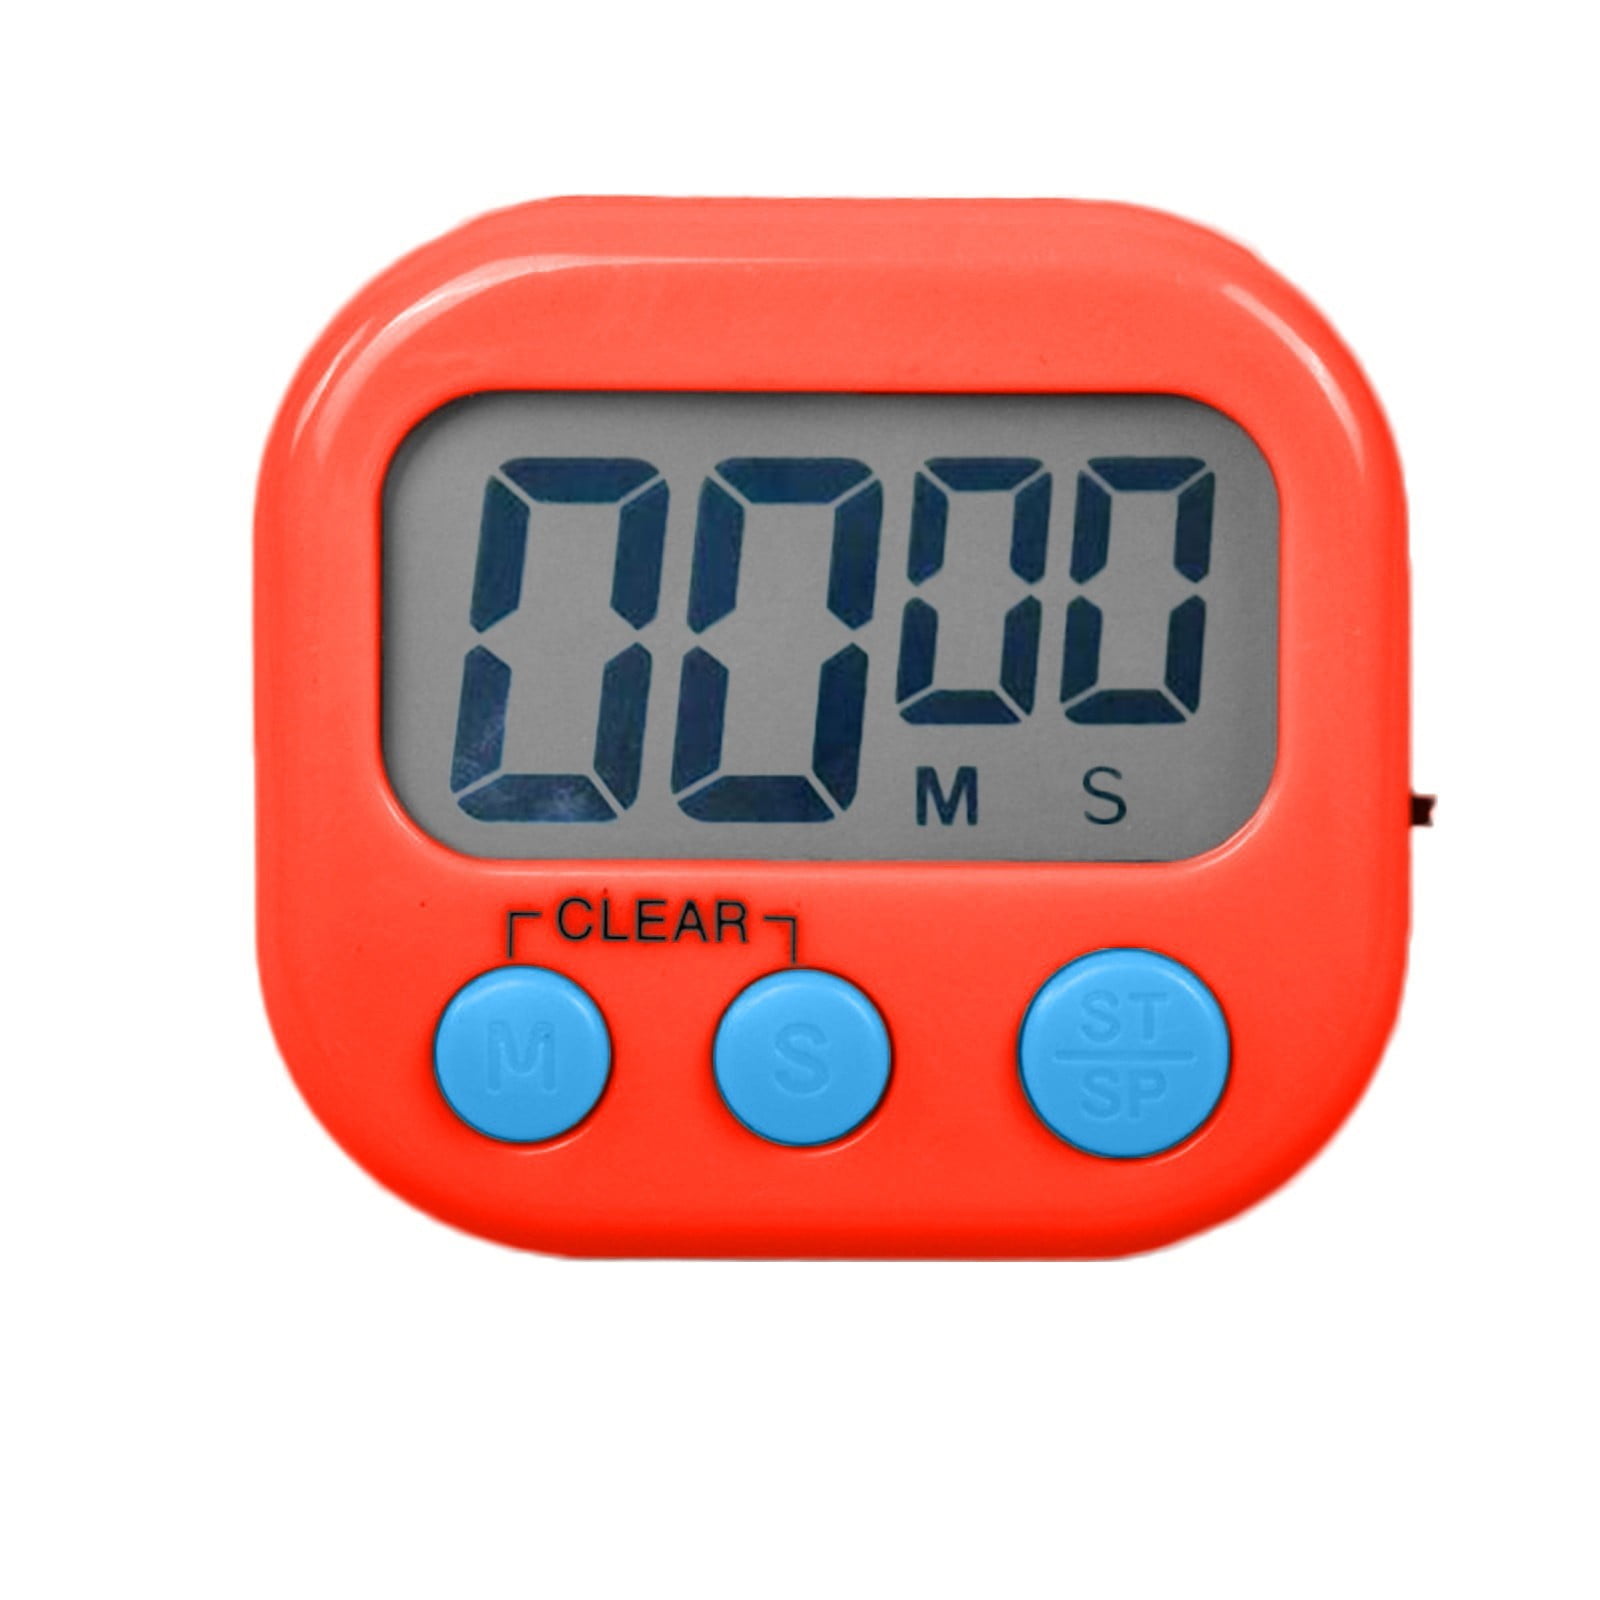 Jpgif Kitchen Timer, Classroom Timers For Teachers Kids, Count Up Countdown